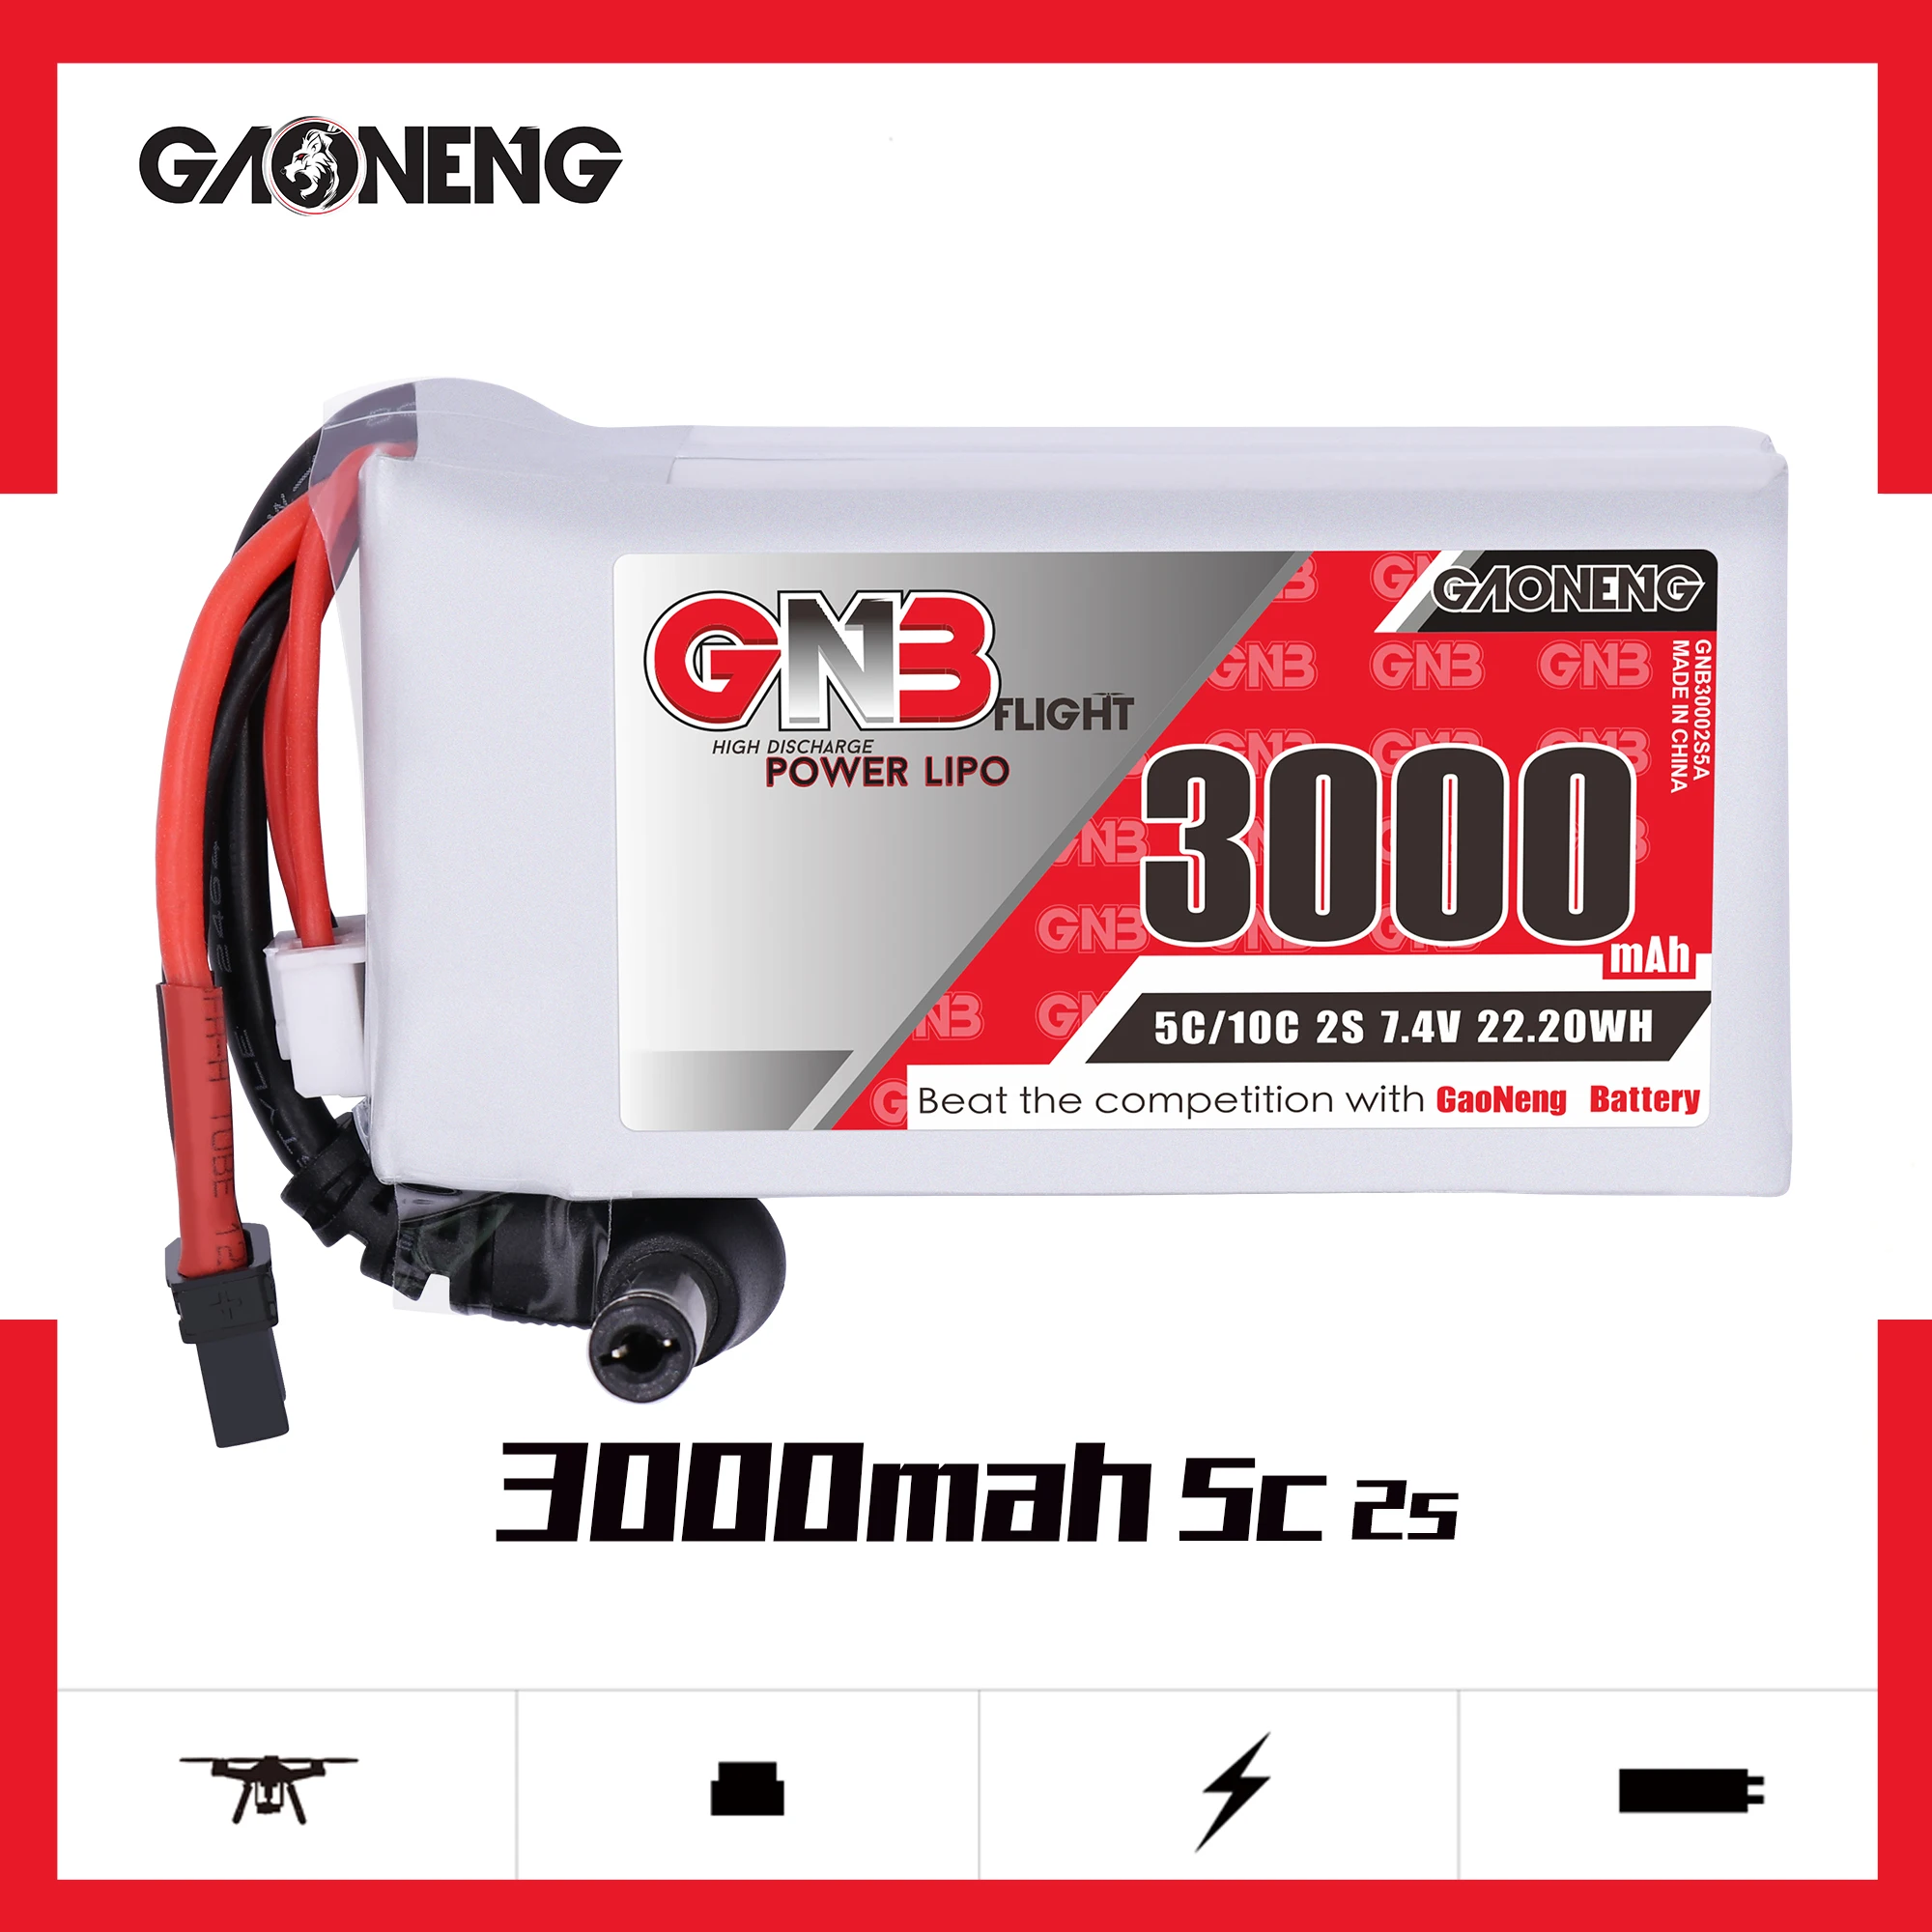 

GAONENG GNB 3000mAh 2S1P 7.4V 5C/10C Lipo battery with XT30 or XT60 and DC5.5 Plug for DJI FPV FLY MORE COMBO GOGGLES RC parts